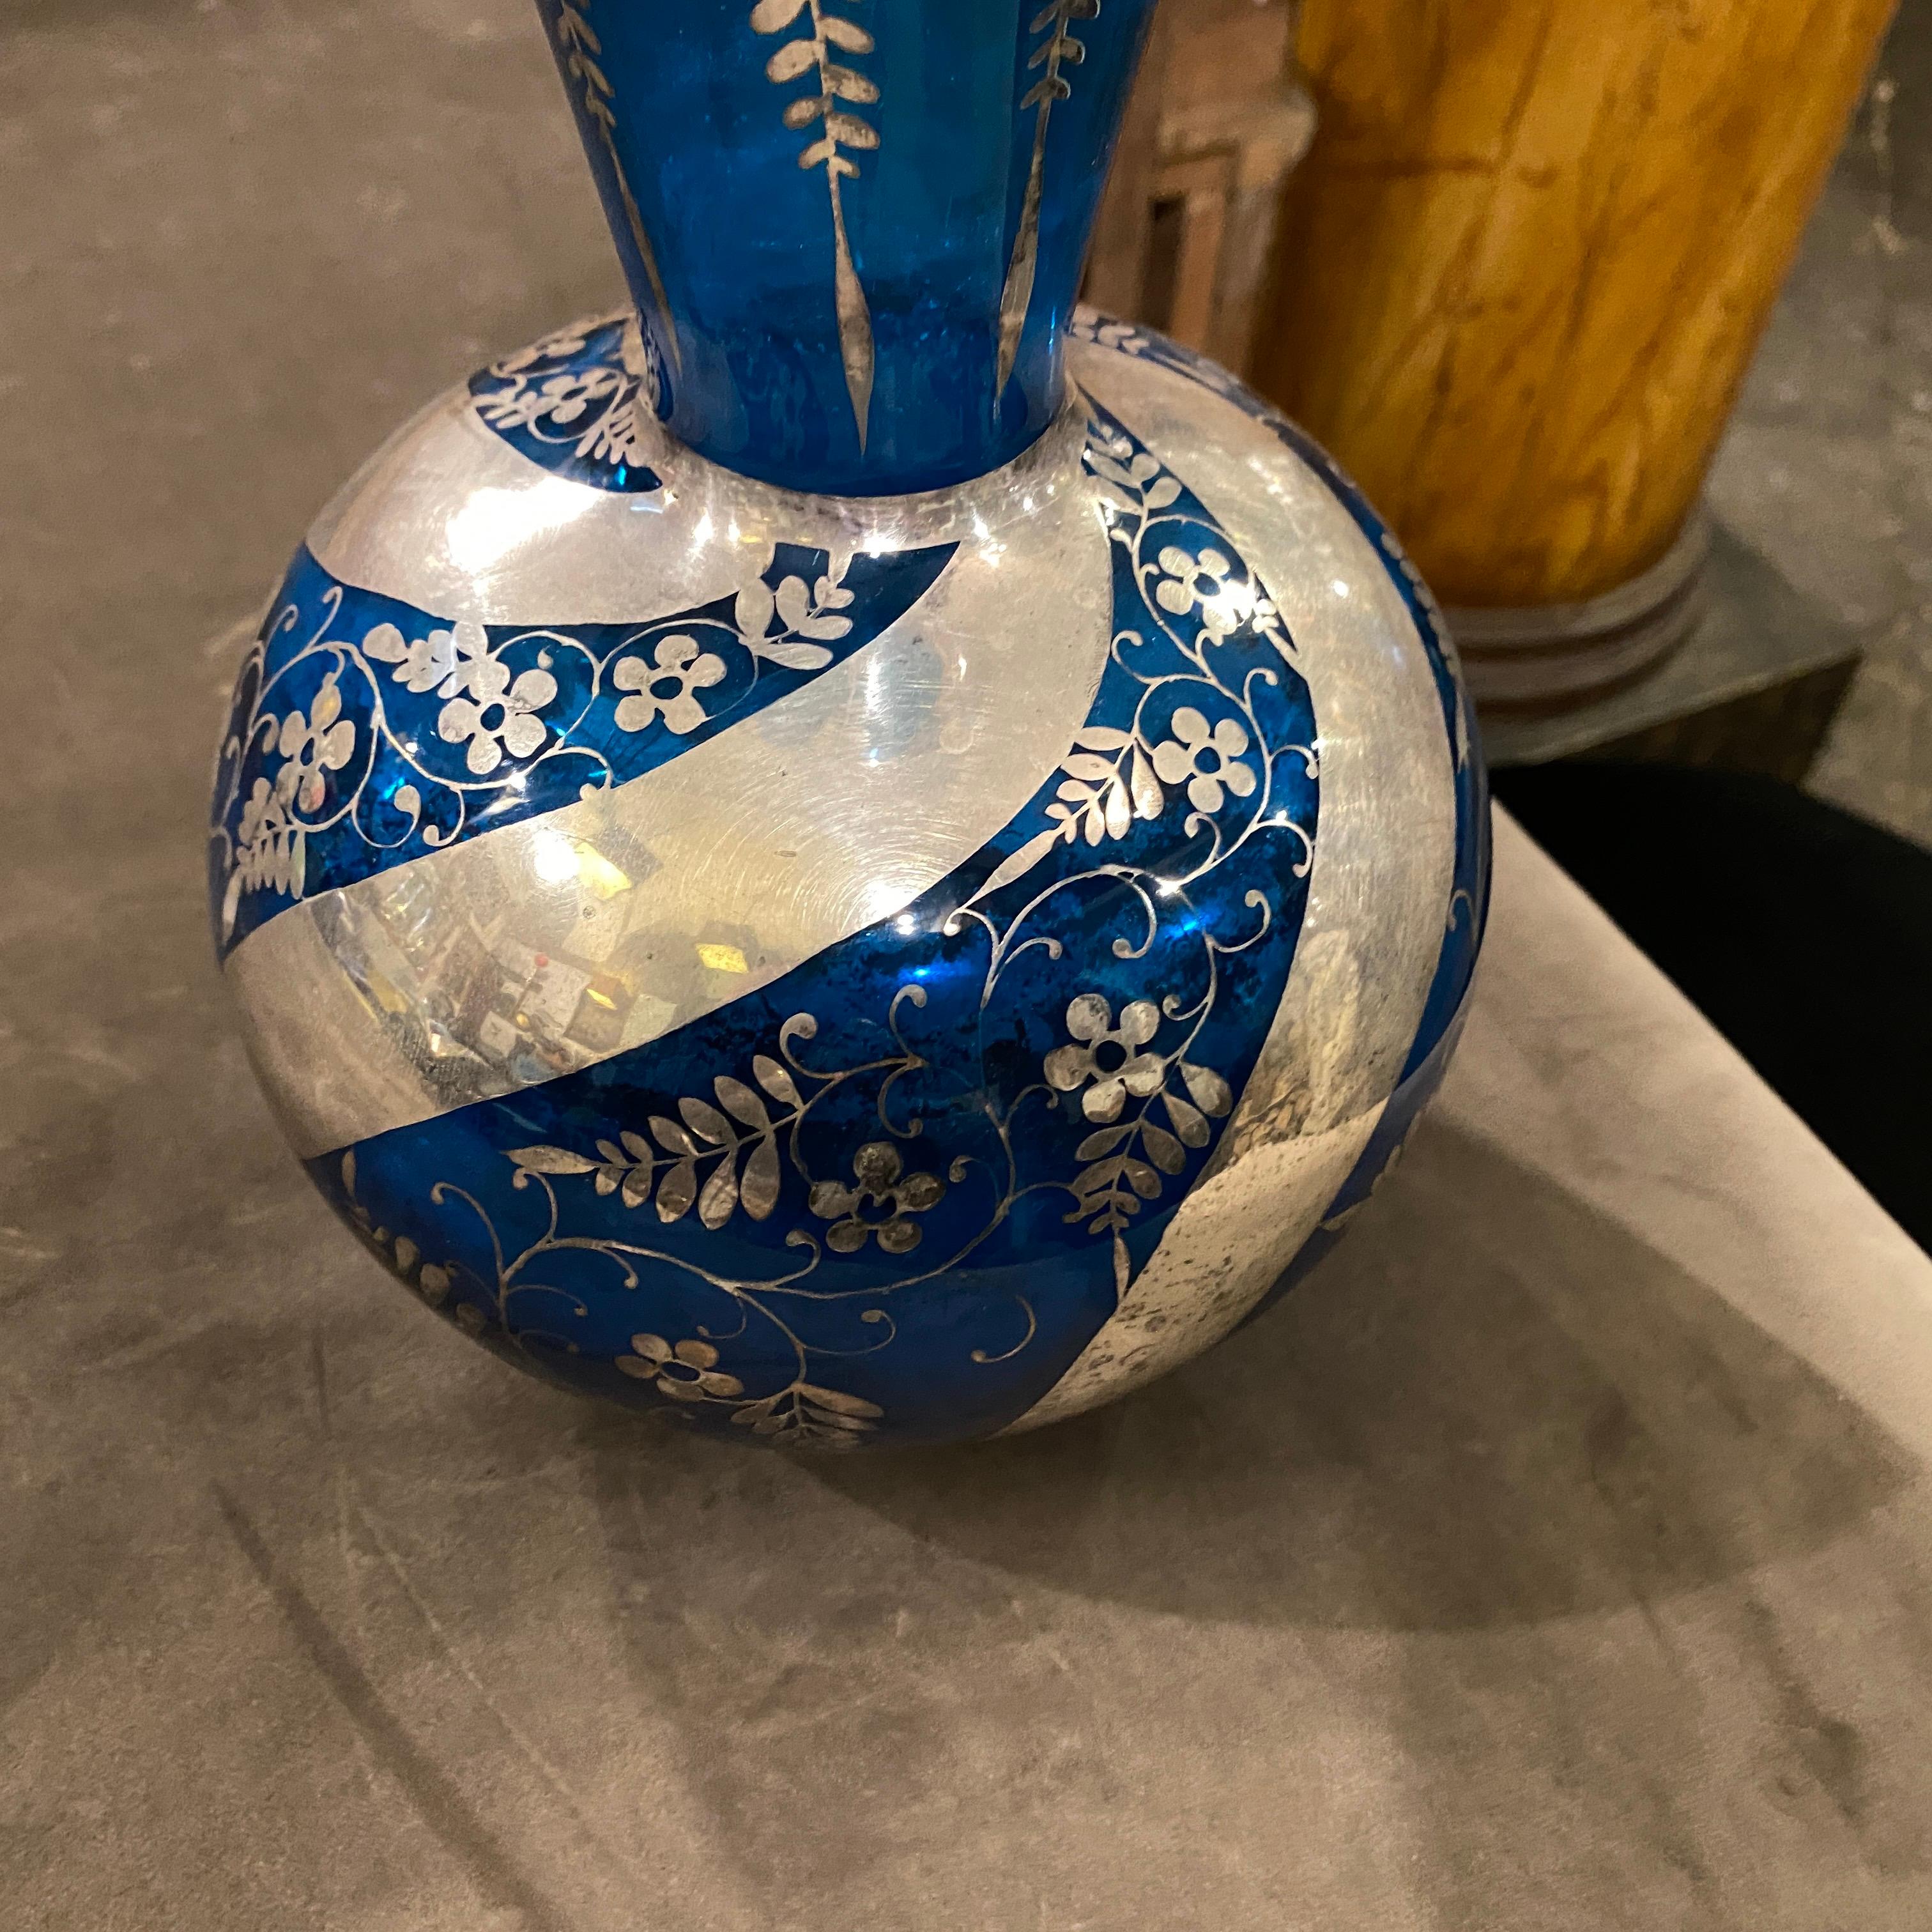 A rare blue glass and sterling vase made in Italy in the Thirties, it's in perfect conditions, floral sterling silver decors are in original patina. 